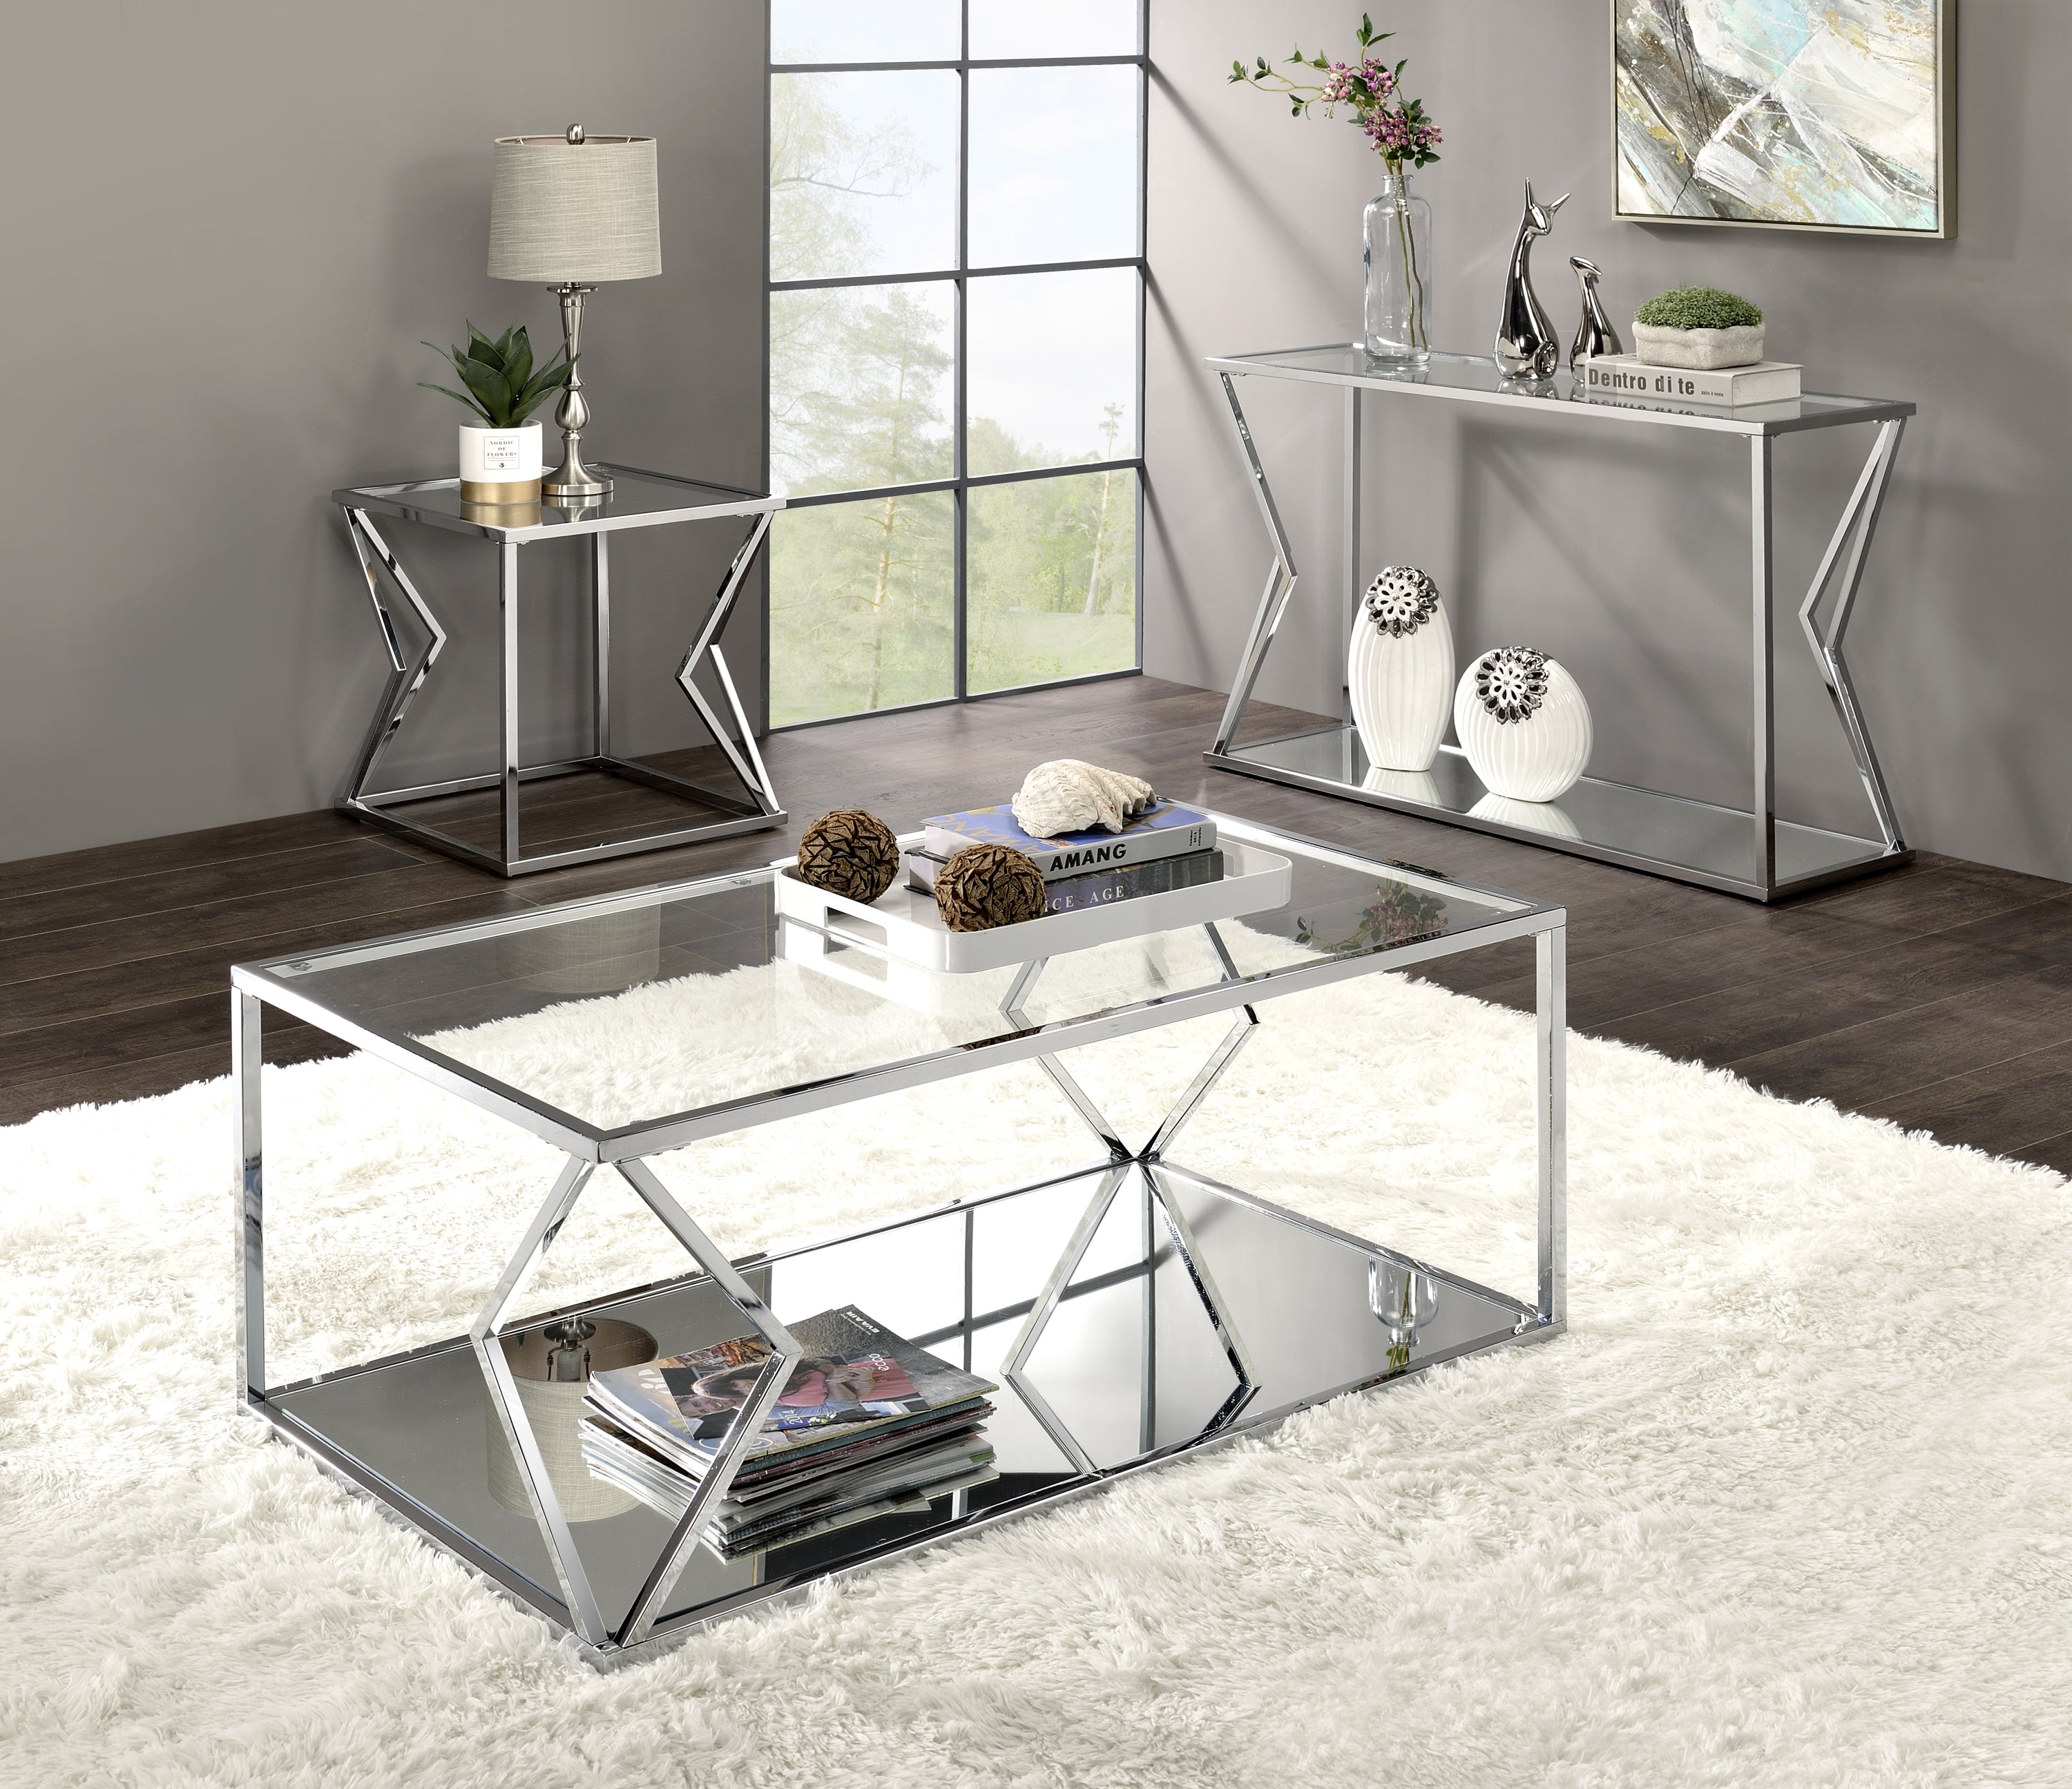 Virtue Coffee Table, Clear Glass & Chrome Finish